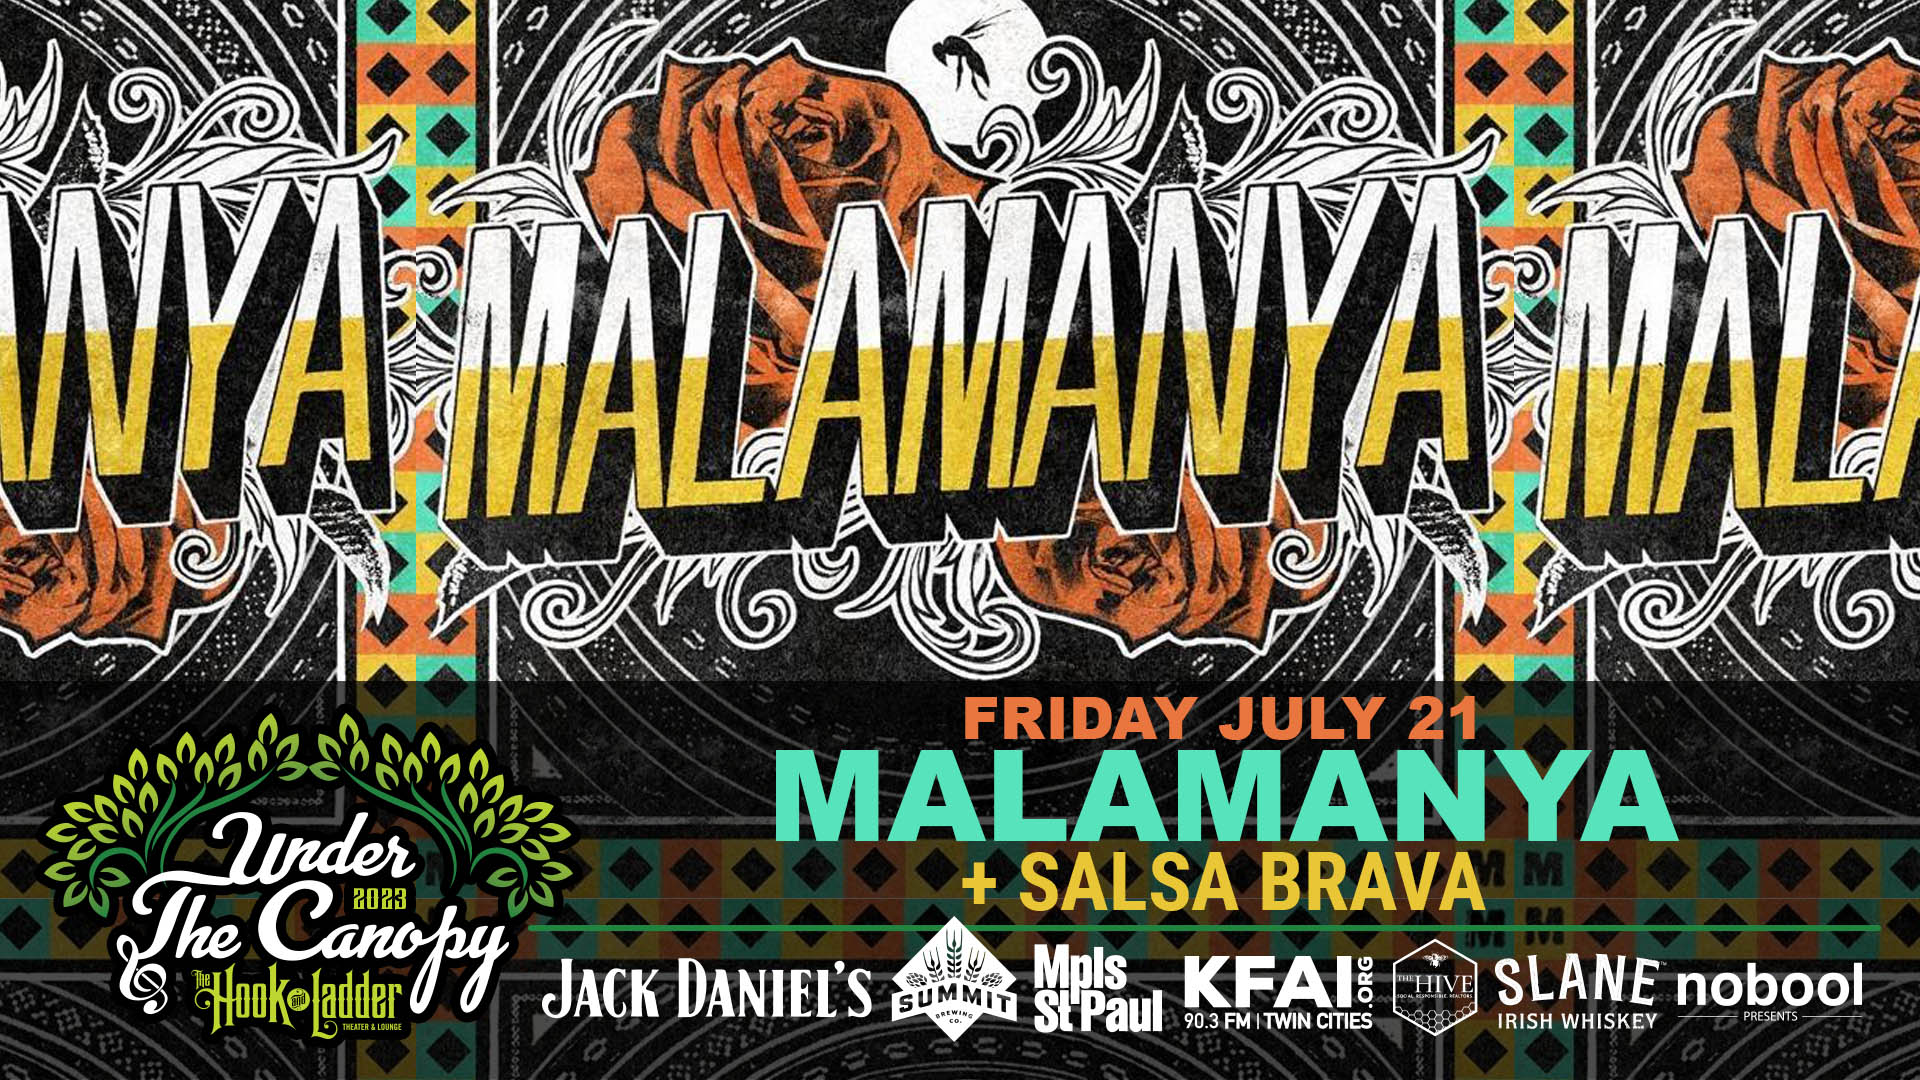 Malamanya + Salsa Brava Dance Party Friday, July 21 Under The Canopy at The Hook and Ladder Theater "An Urban Outdoor Summer Concert Series" Doors 6:00pm :: Music 7:00pm :: 21+ Tickets to Attend Both Events GA: $16 ADV / $22 DOS